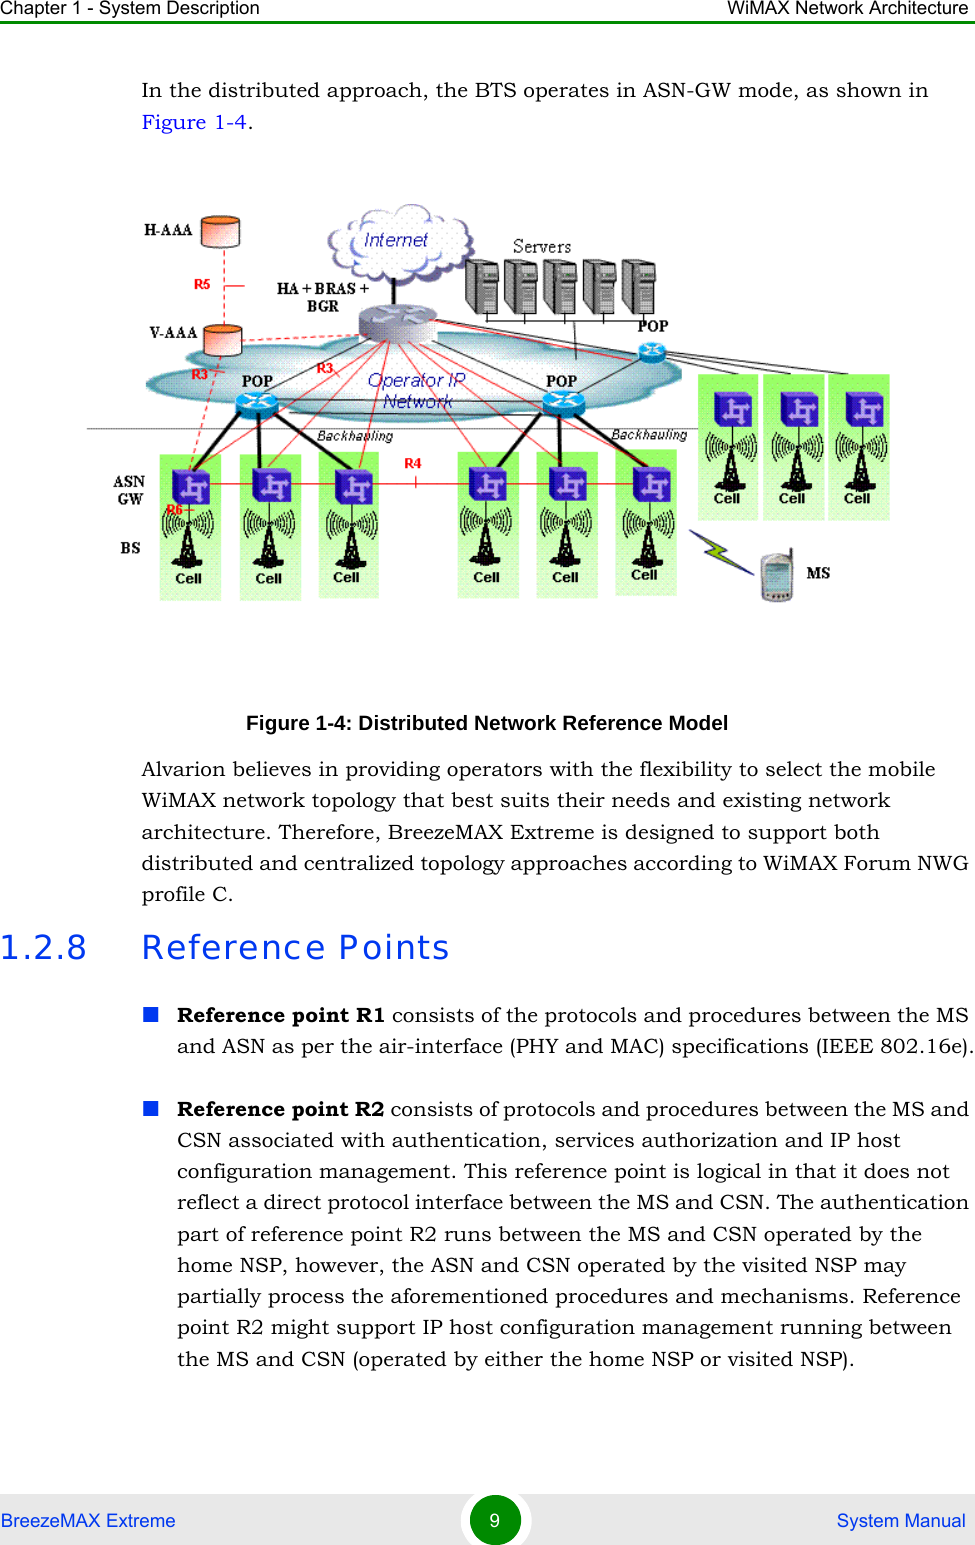 Chapter 1 - System Description WiMAX Network ArchitectureBreezeMAX Extreme 9 System ManualIn the distributed approach, the BTS operates in ASN-GW mode, as shown in Figure 1-4. Alvarion believes in providing operators with the flexibility to select the mobile WiMAX network topology that best suits their needs and existing network architecture. Therefore, BreezeMAX Extreme is designed to support both distributed and centralized topology approaches according to WiMAX Forum NWG profile C.1.2.8 Reference PointsReference point R1 consists of the protocols and procedures between the MS and ASN as per the air-interface (PHY and MAC) specifications (IEEE 802.16e).Reference point R2 consists of protocols and procedures between the MS and CSN associated with authentication, services authorization and IP host configuration management. This reference point is logical in that it does not reflect a direct protocol interface between the MS and CSN. The authentication part of reference point R2 runs between the MS and CSN operated by the home NSP, however, the ASN and CSN operated by the visited NSP may partially process the aforementioned procedures and mechanisms. Reference point R2 might support IP host configuration management running between the MS and CSN (operated by either the home NSP or visited NSP).Figure 1-4: Distributed Network Reference Model